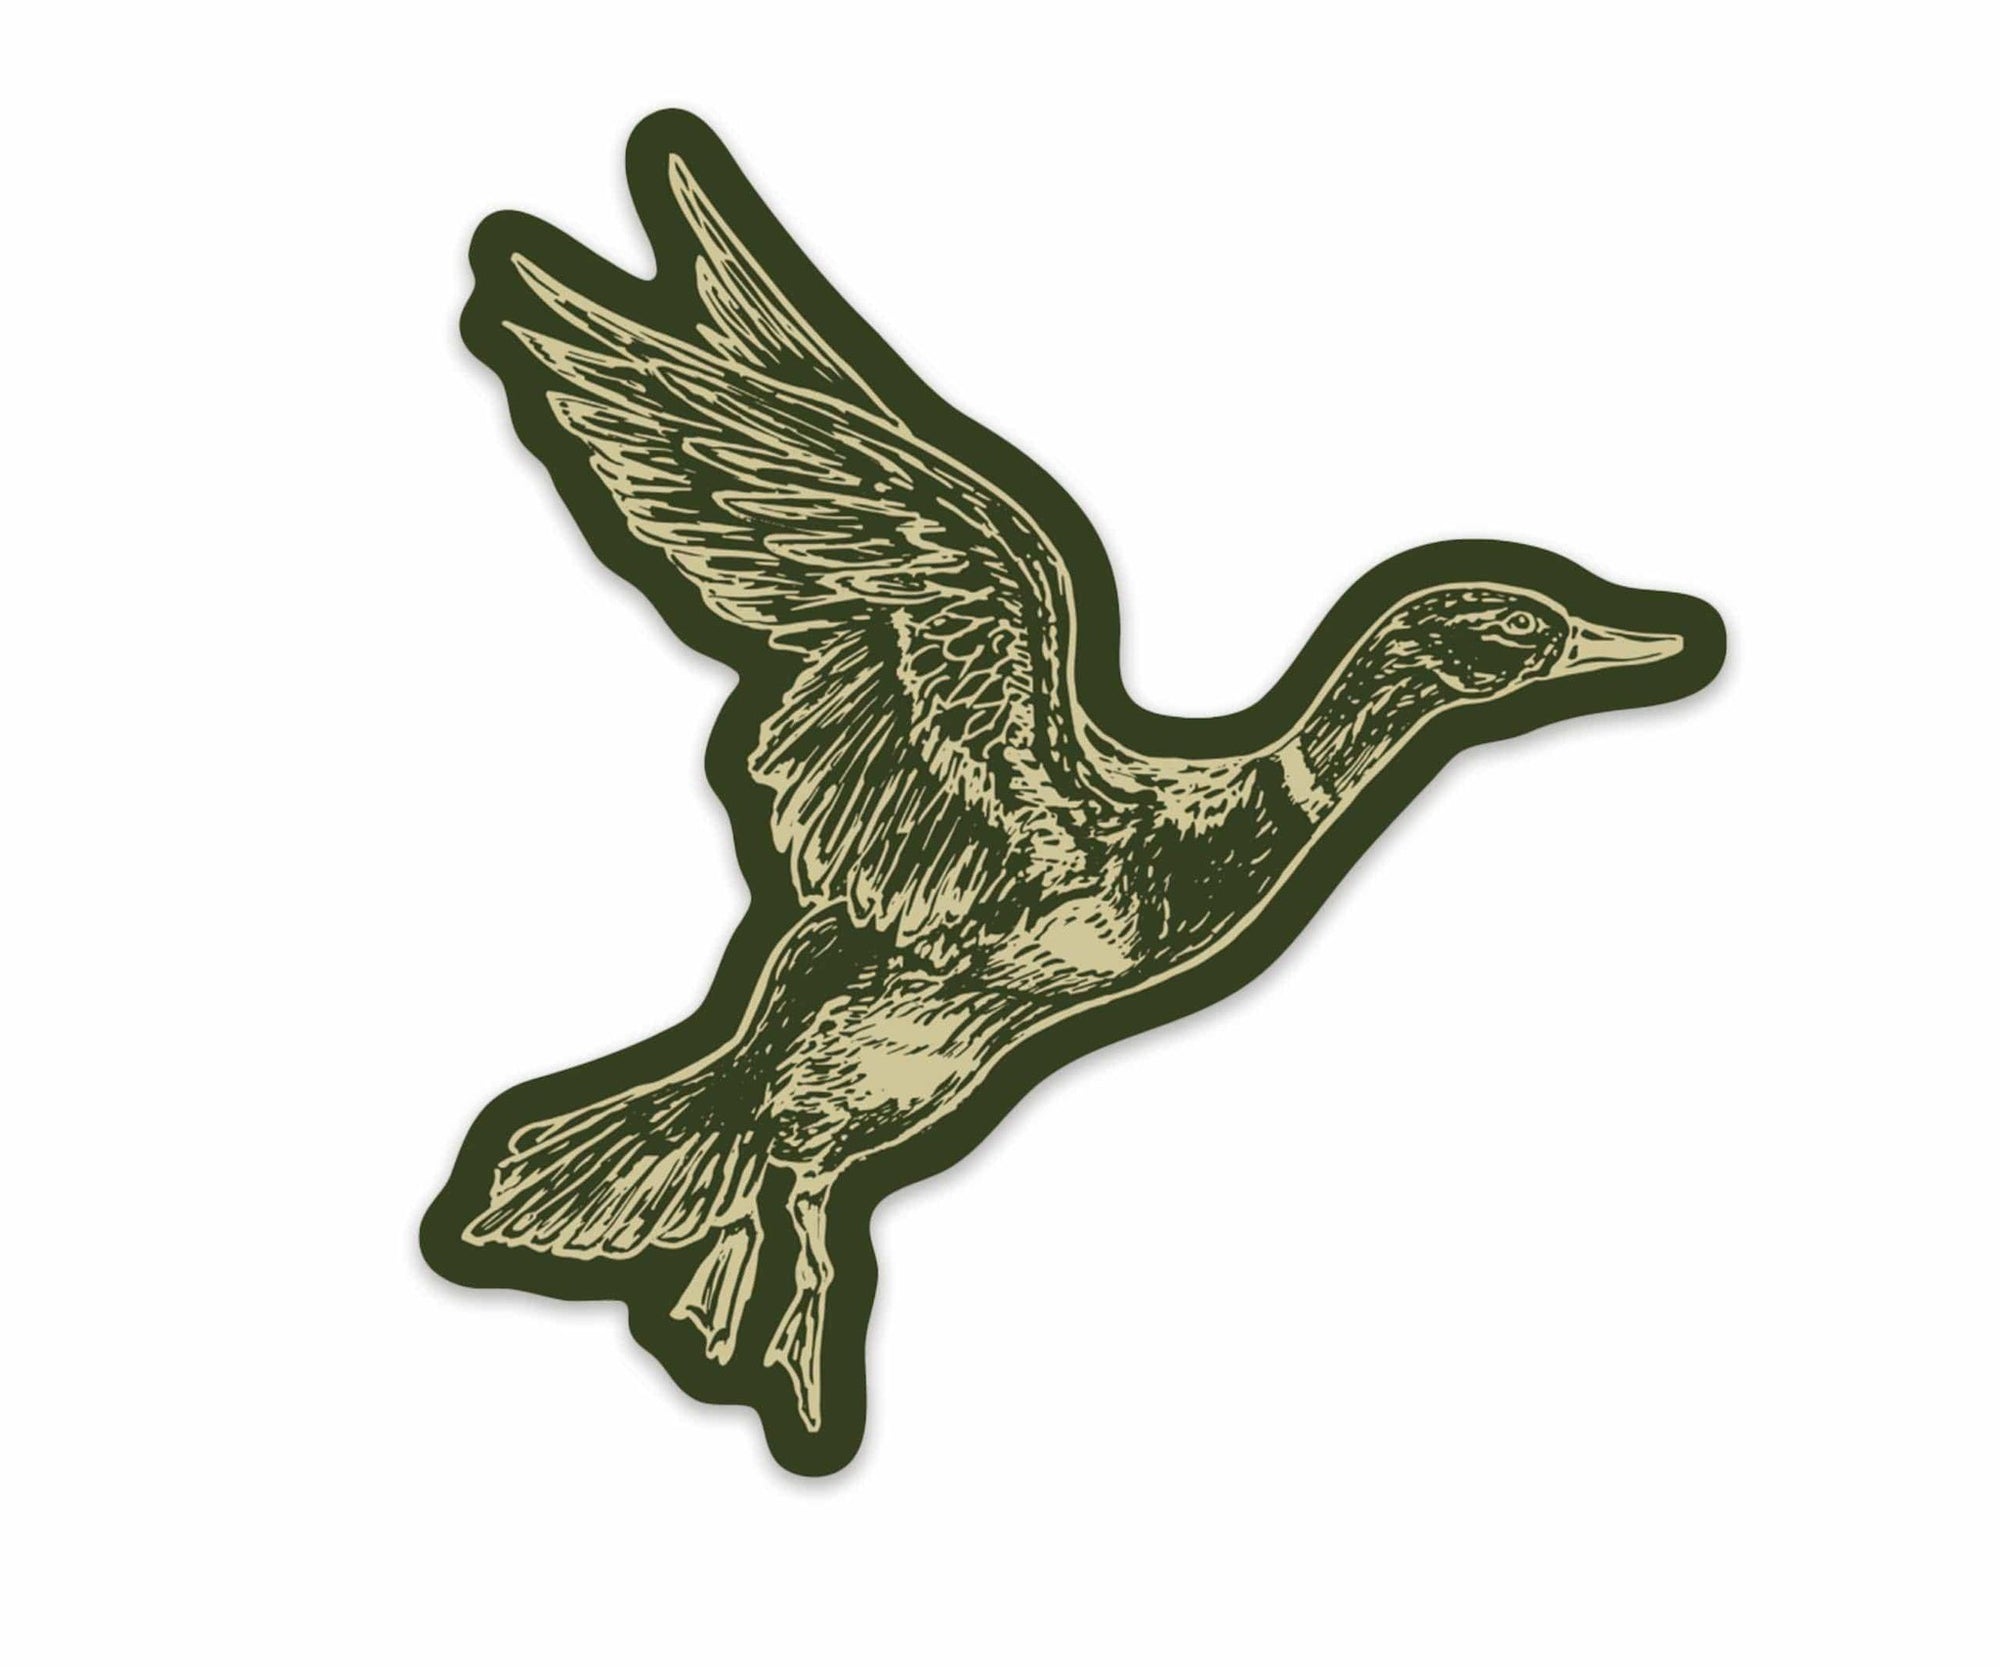 A Mallard Duck Sticker from The Wild Wander flying in the air.